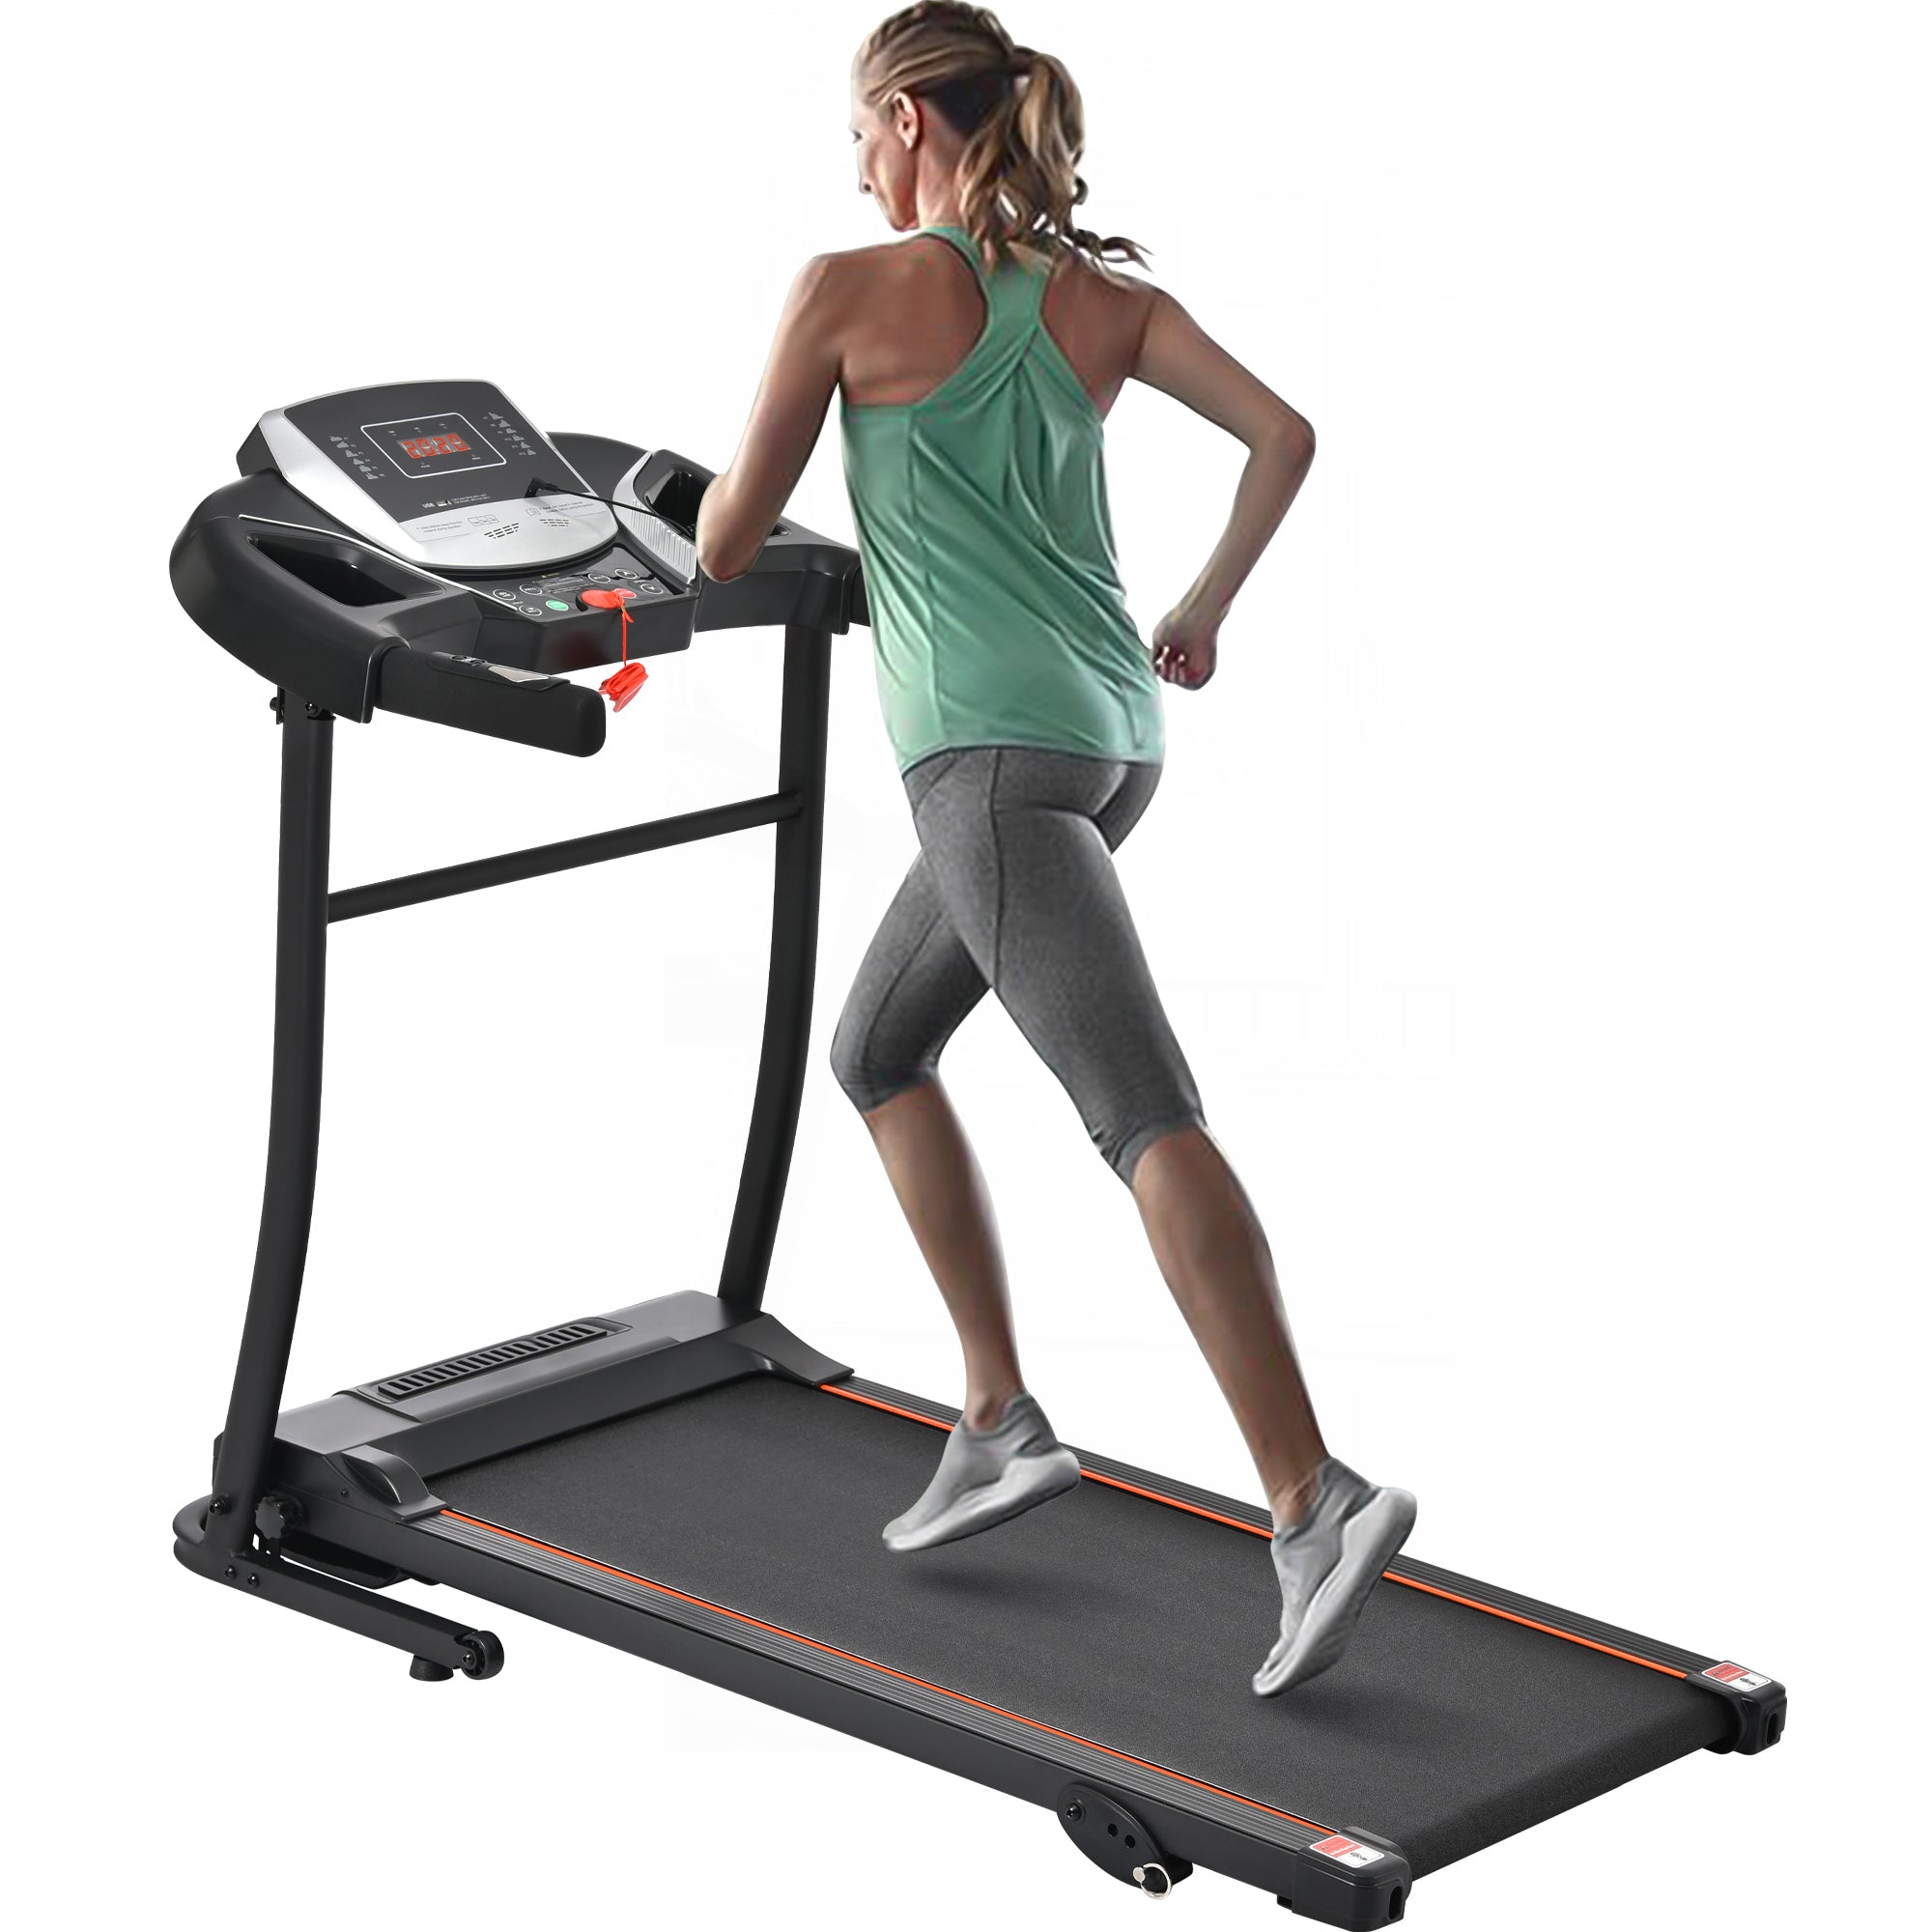 Folding-Treadmill-Electric-Running-Machine-Walking-Jogging-Machine-with-3-Level-Incline-12-Preset-Programs-for-Home-Gym-Exercise-&-Fitness